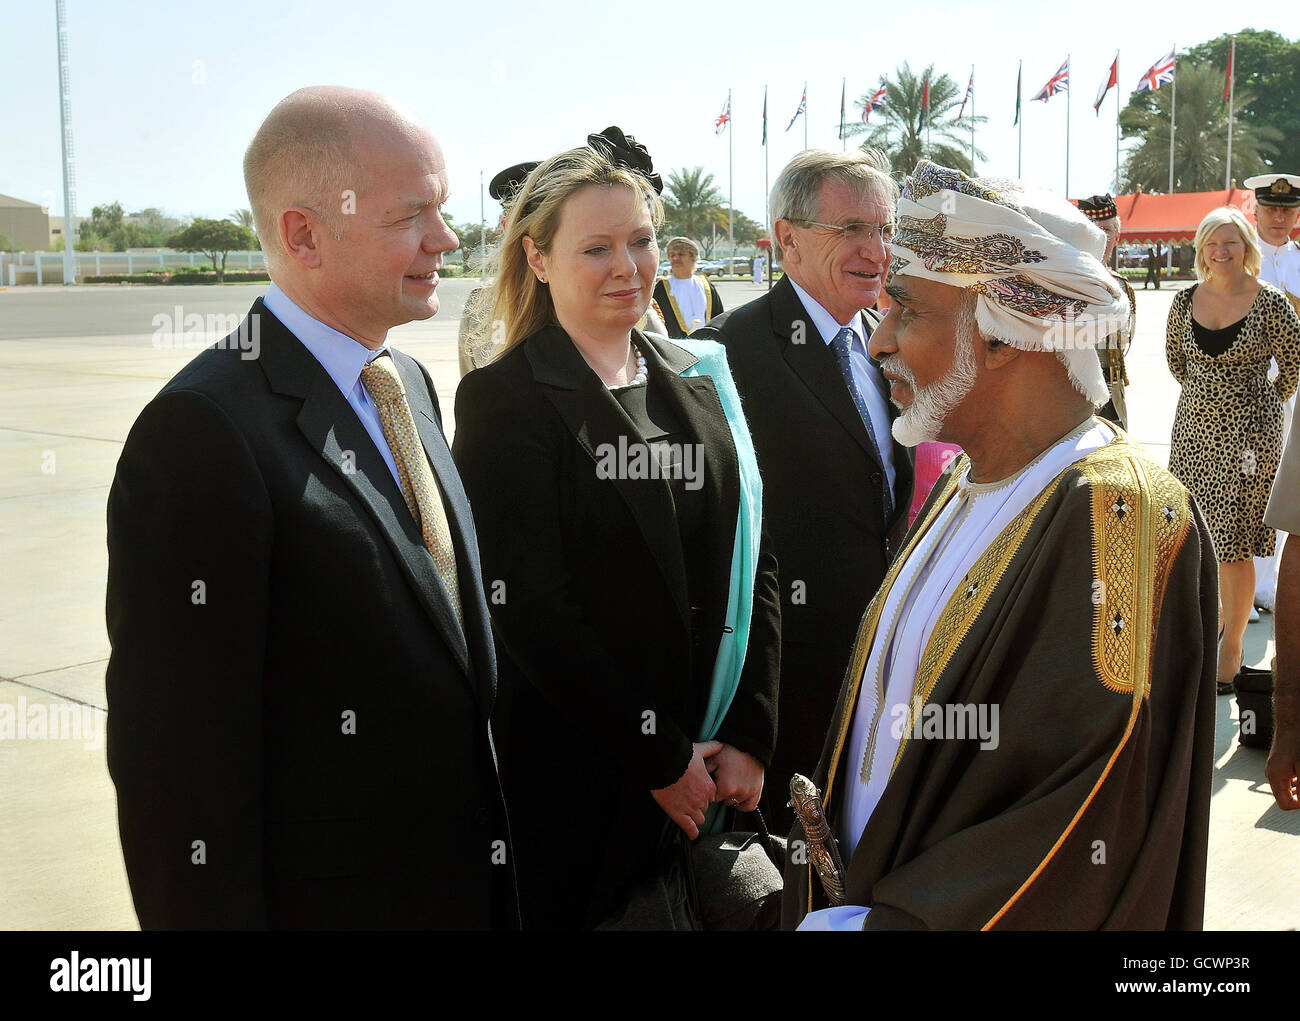 Foreign Secretary William Hague and his wife Ffion talk with the Sultan of Oman, His Majesty Sultan Qaboos bin Said, before departing Muscat Airport for home, after they accompanied Queen Elizabeth II and Duke of Edinburgh on a five day State Visit to the Gulf region. Stock Photo